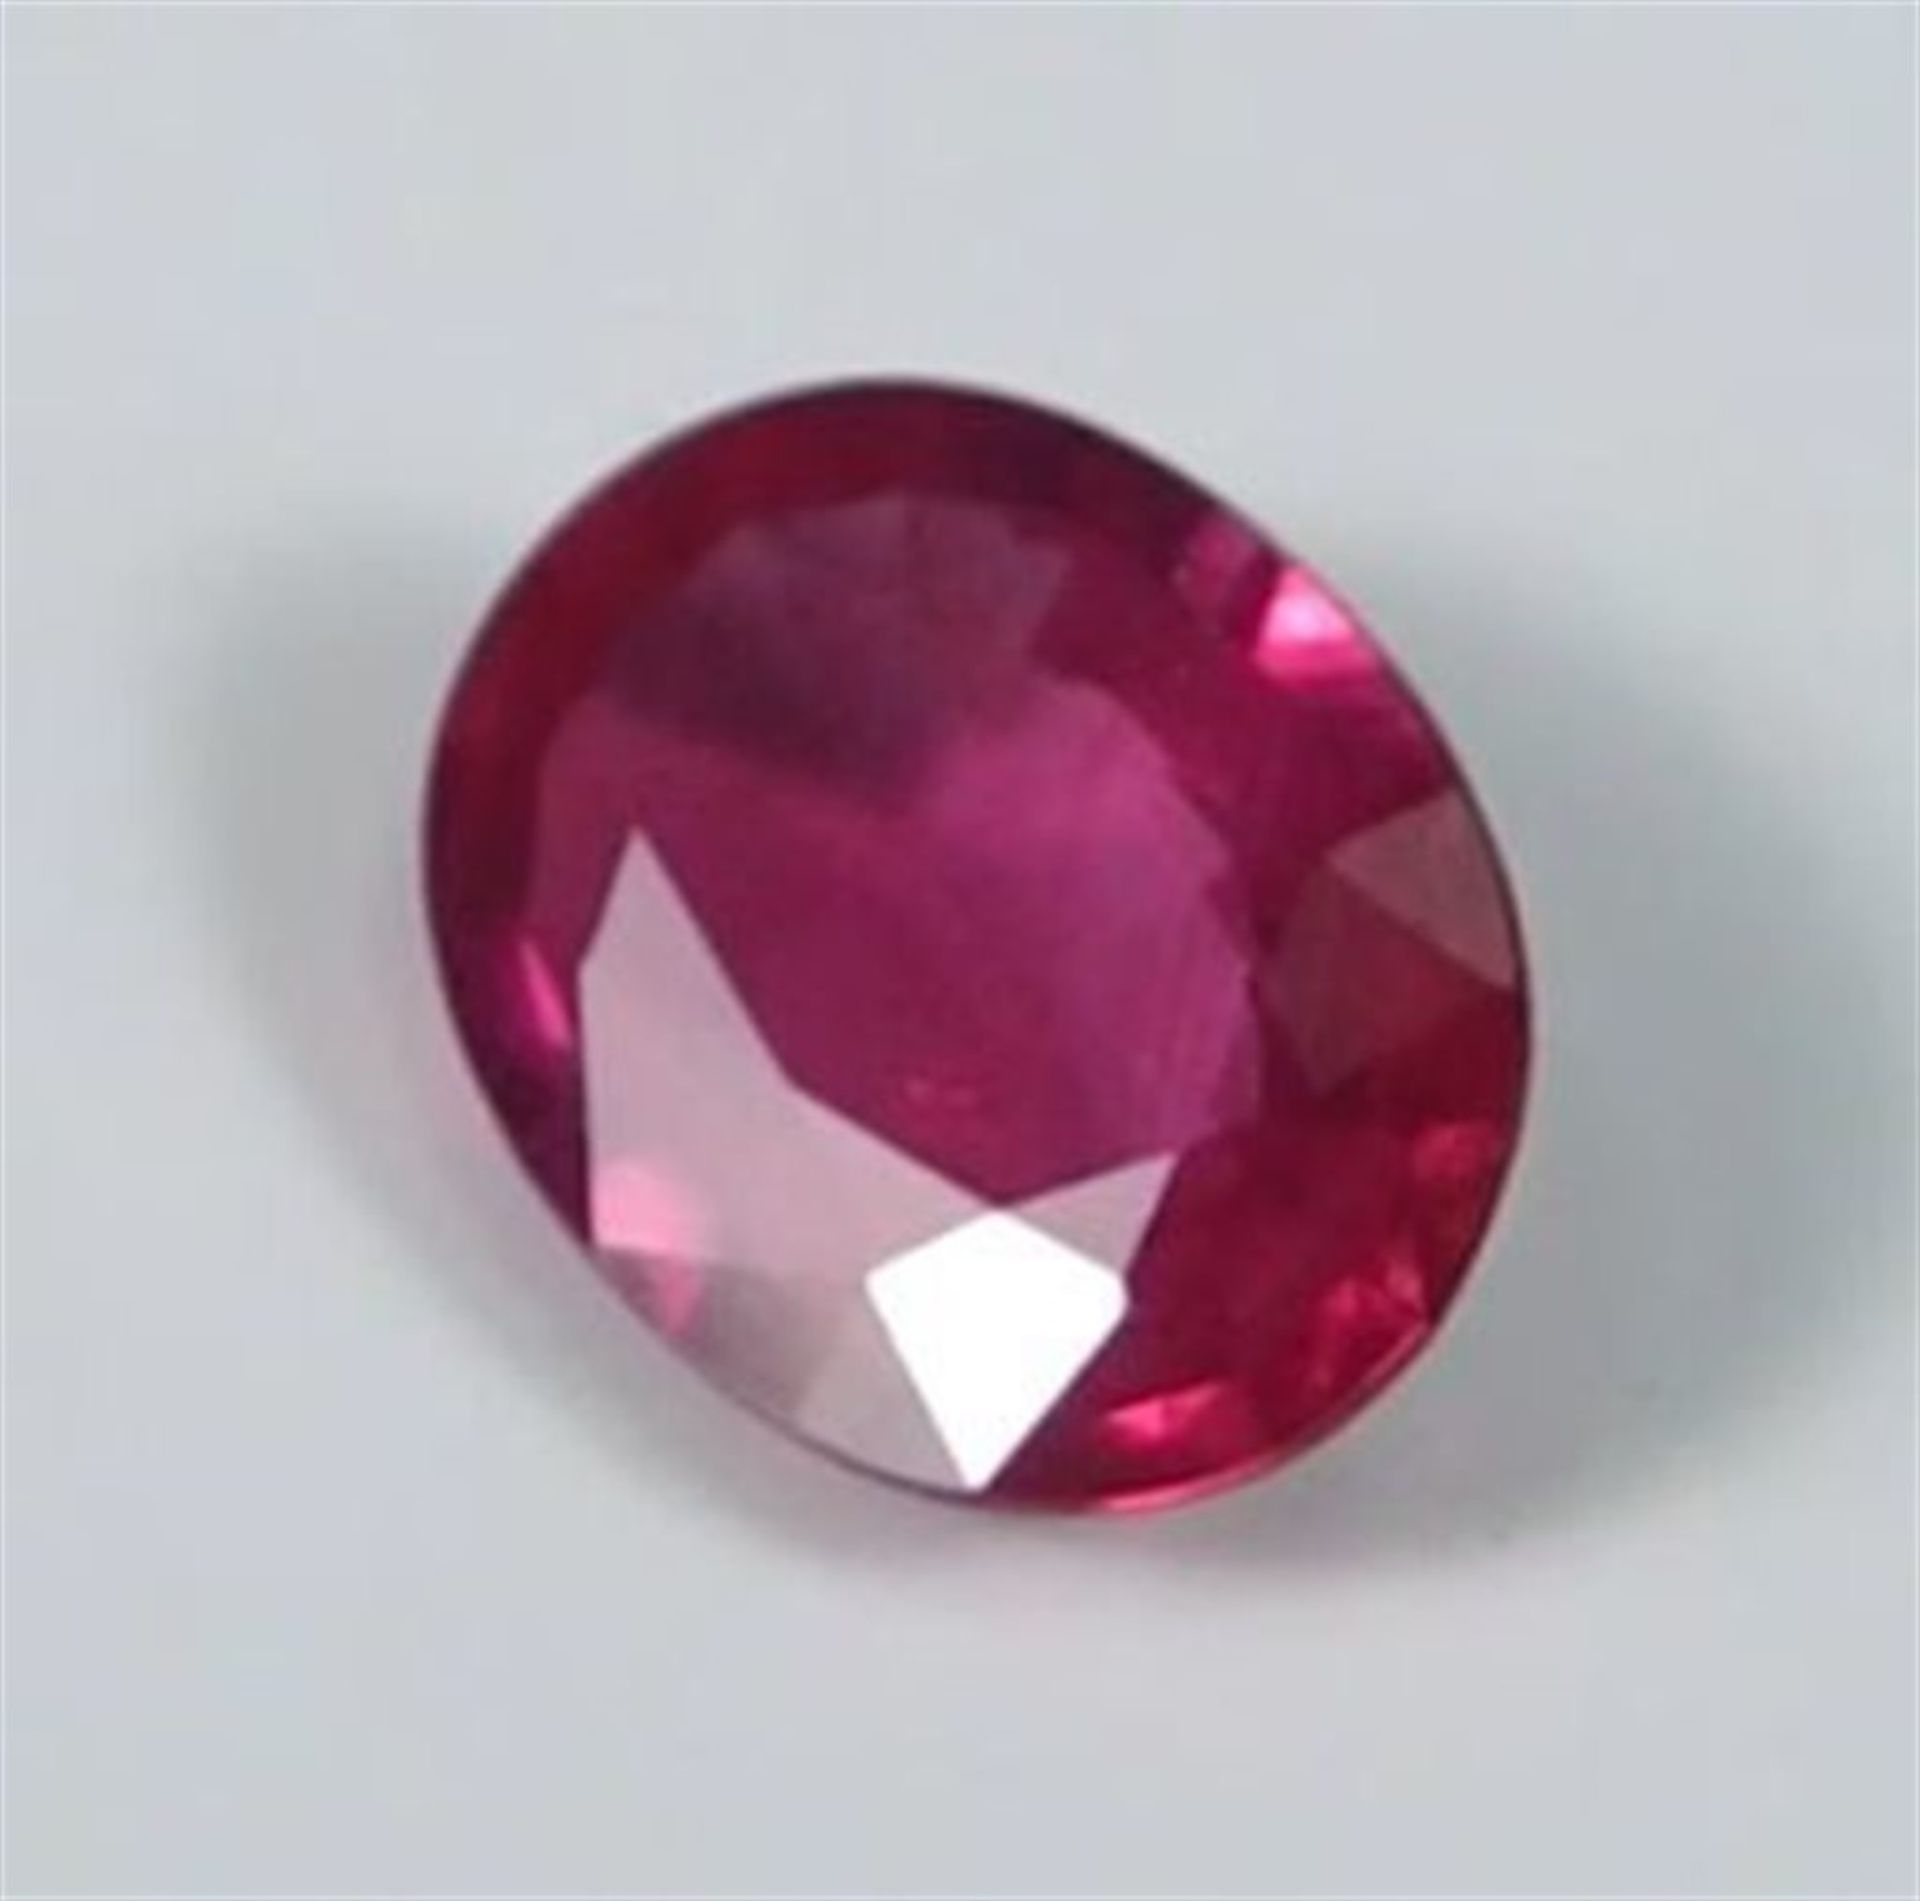 GIA Certified 1.22 ct. Untreated Ruby - BURMA - Image 6 of 10